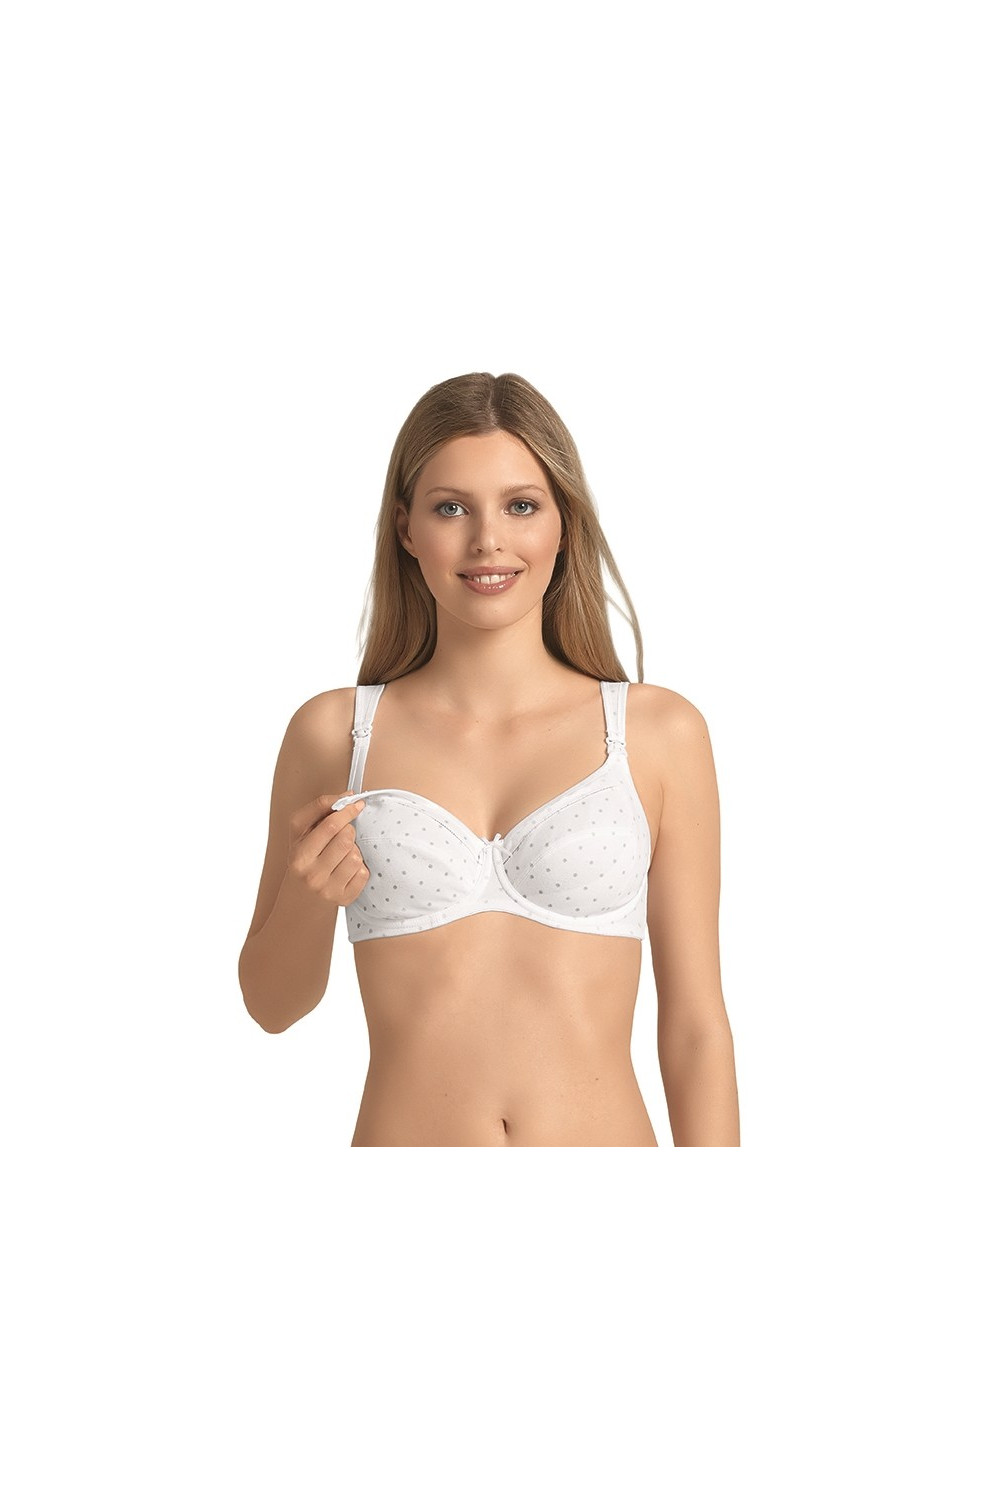 Cotton nursing bra with soft underwire that does not press the